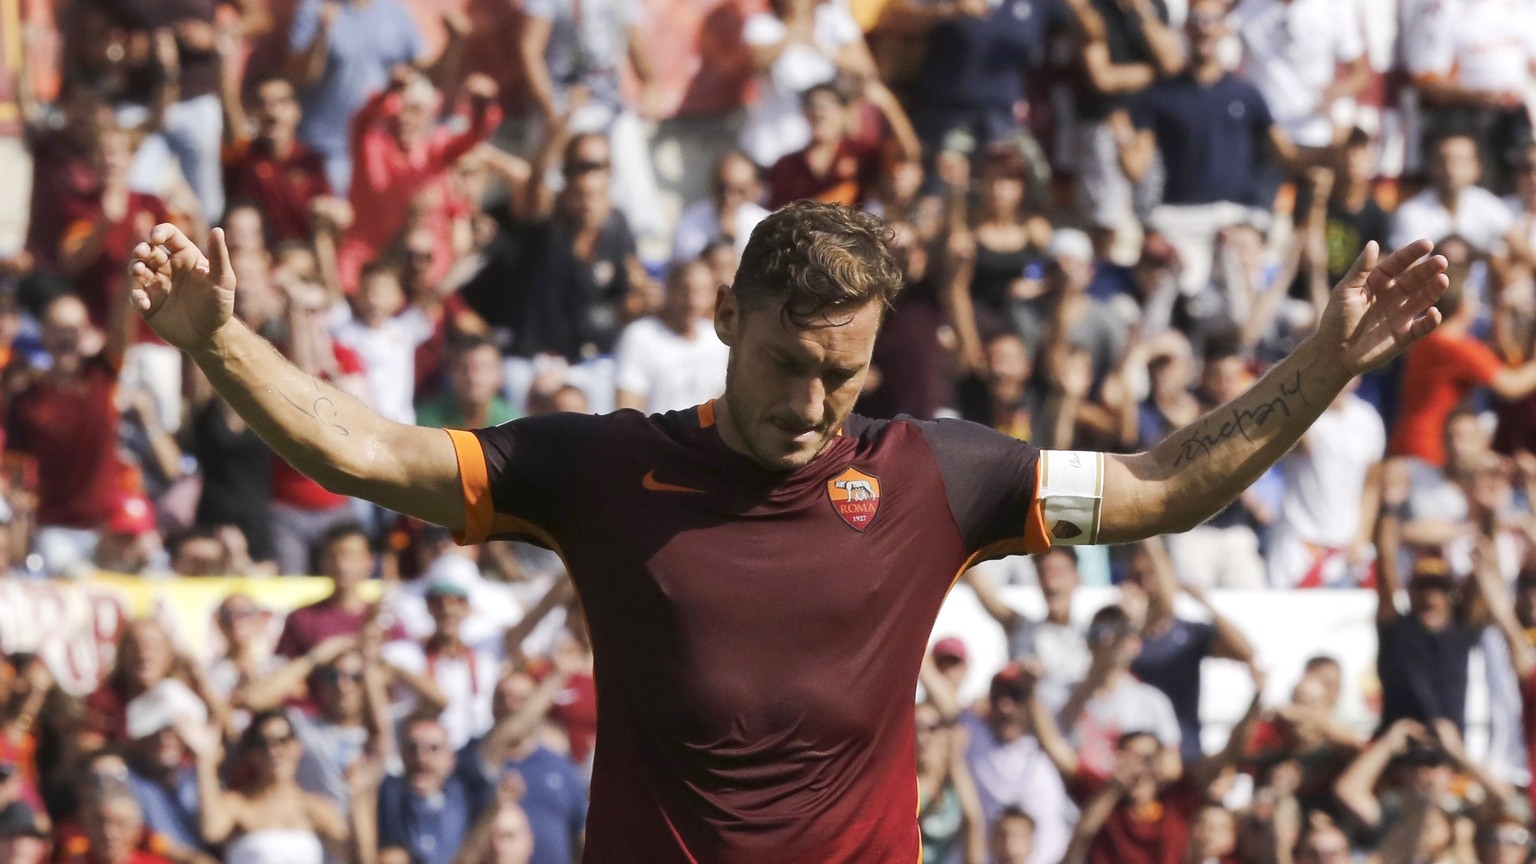 Romaís Francesco Totti celebrates after scoring during a Serie A soccer match between Roma and Sassuolo, at Rome&#039;s Olympic stadium, Sunday, Sept. 20, 2015. (AP Photo/Riccardo De Luca)